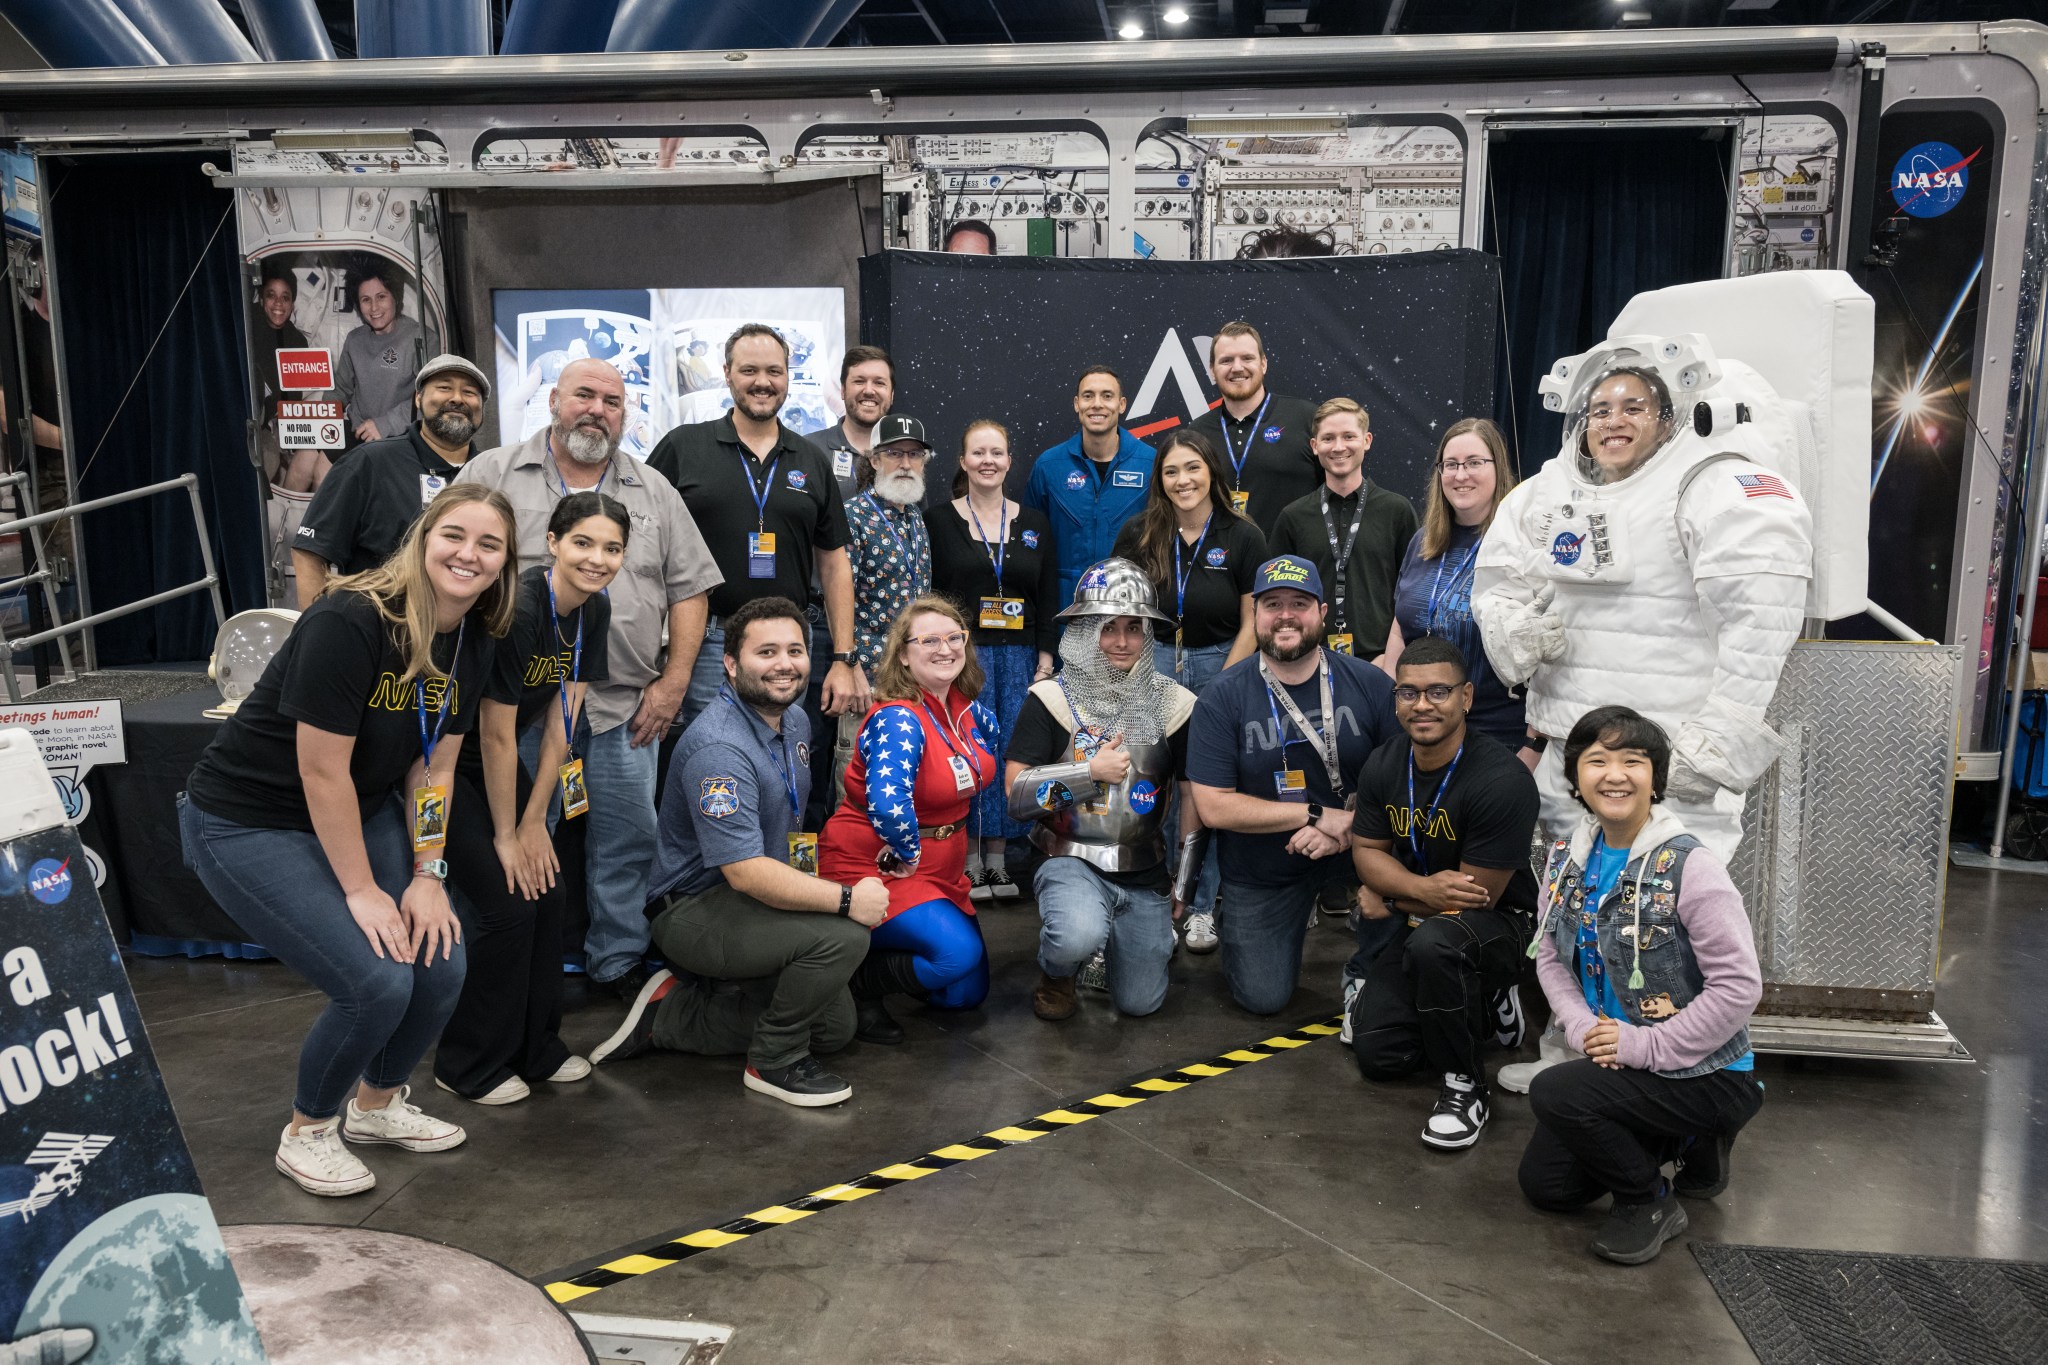 A group of diverse men and women pose for a group photo in front of NASA's exhibit booth at Comicpalooza.